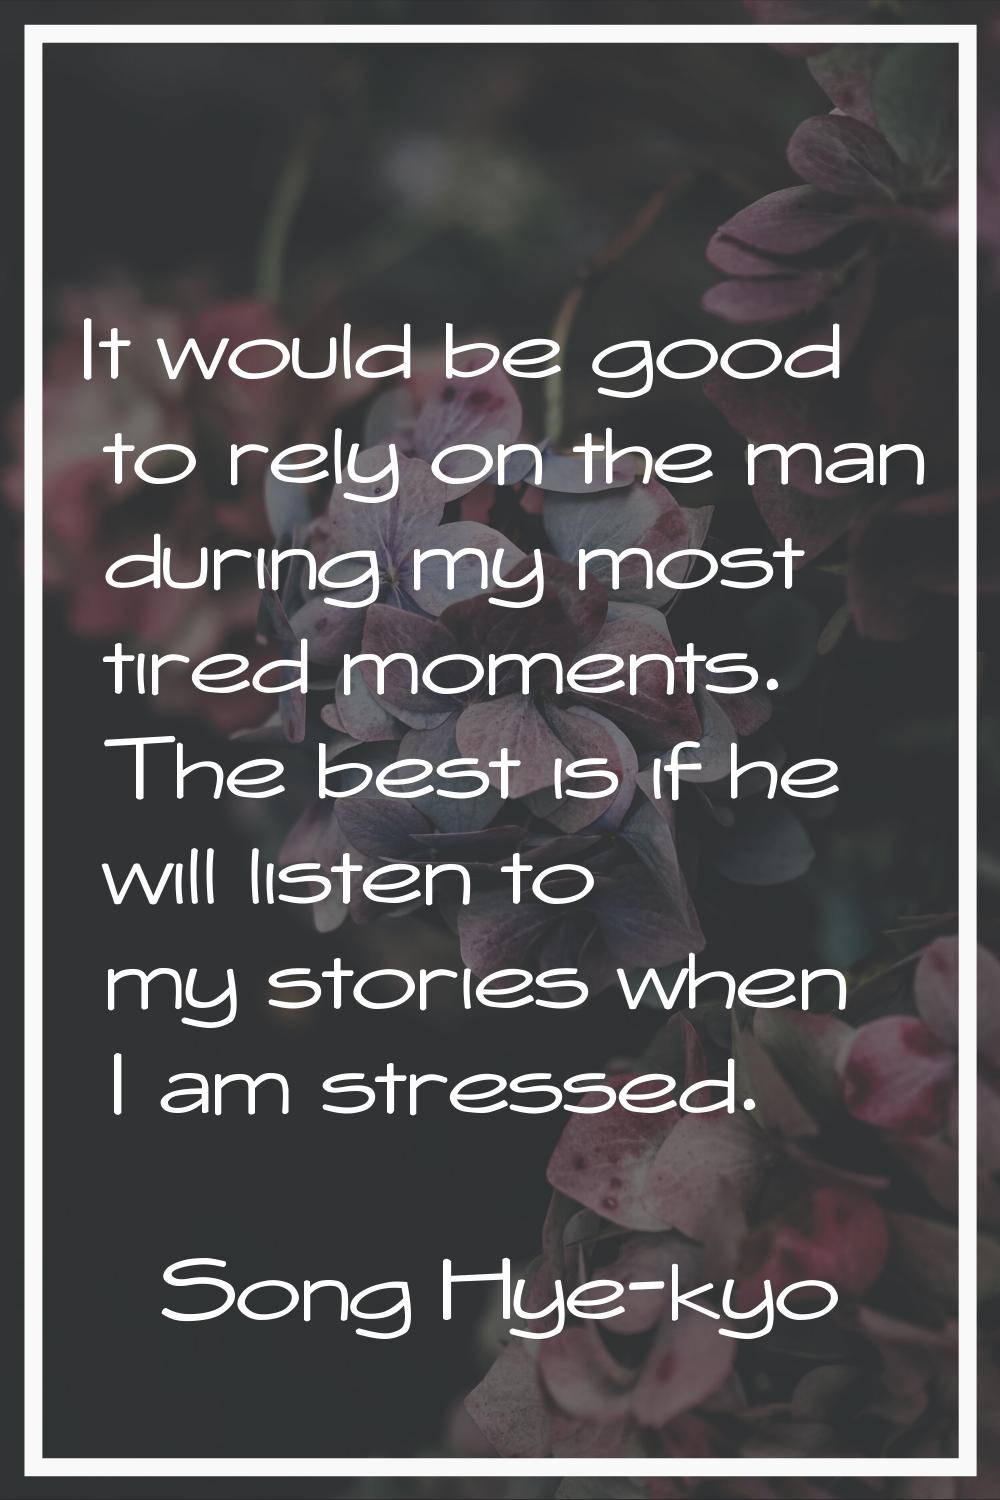 It would be good to rely on the man during my most tired moments. The best is if he will listen to 